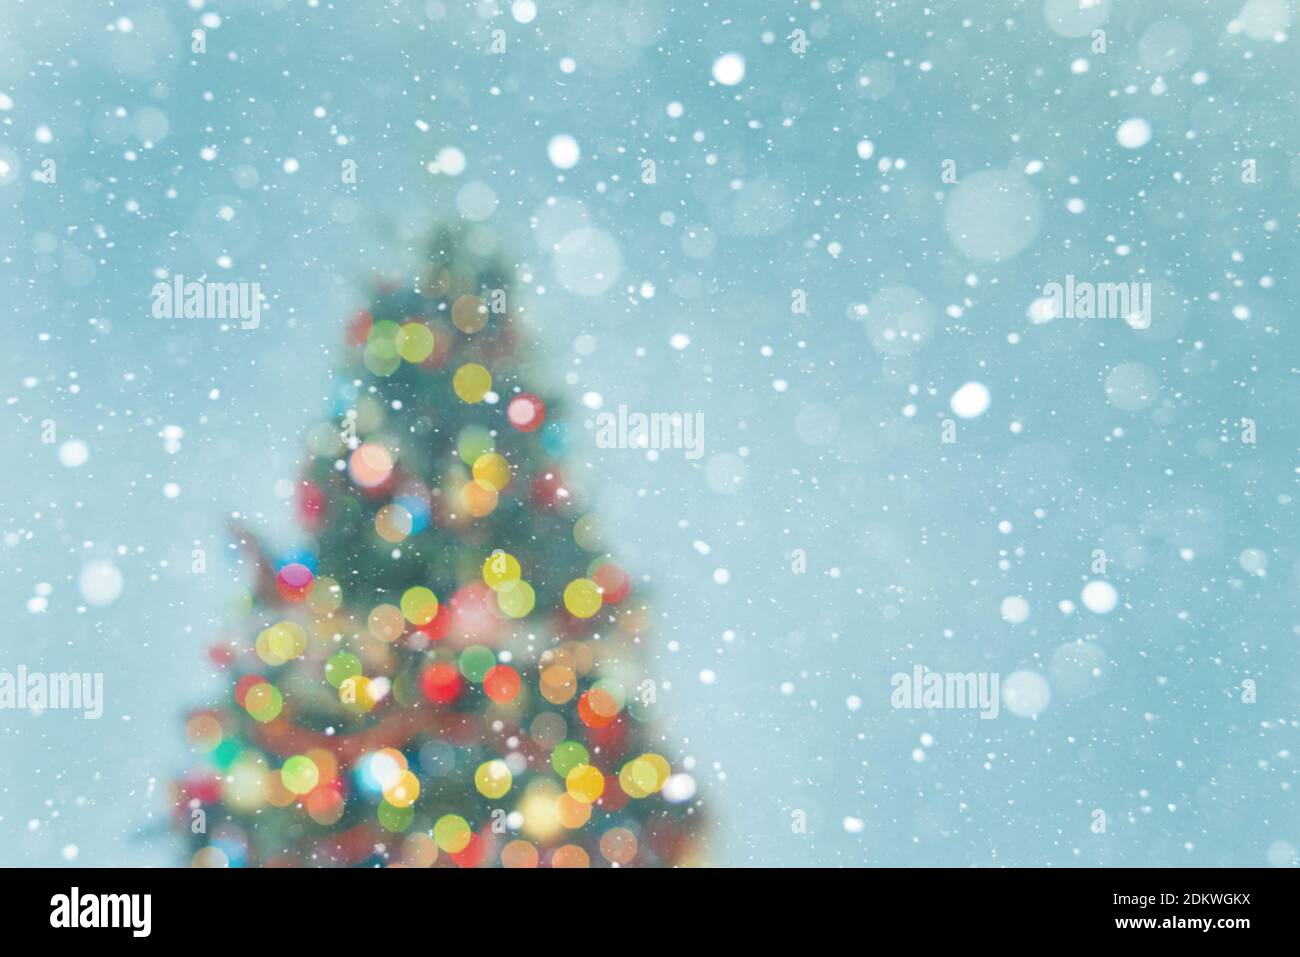 Christmas tree - blured lights and snowflakes on blue background Stock Photo